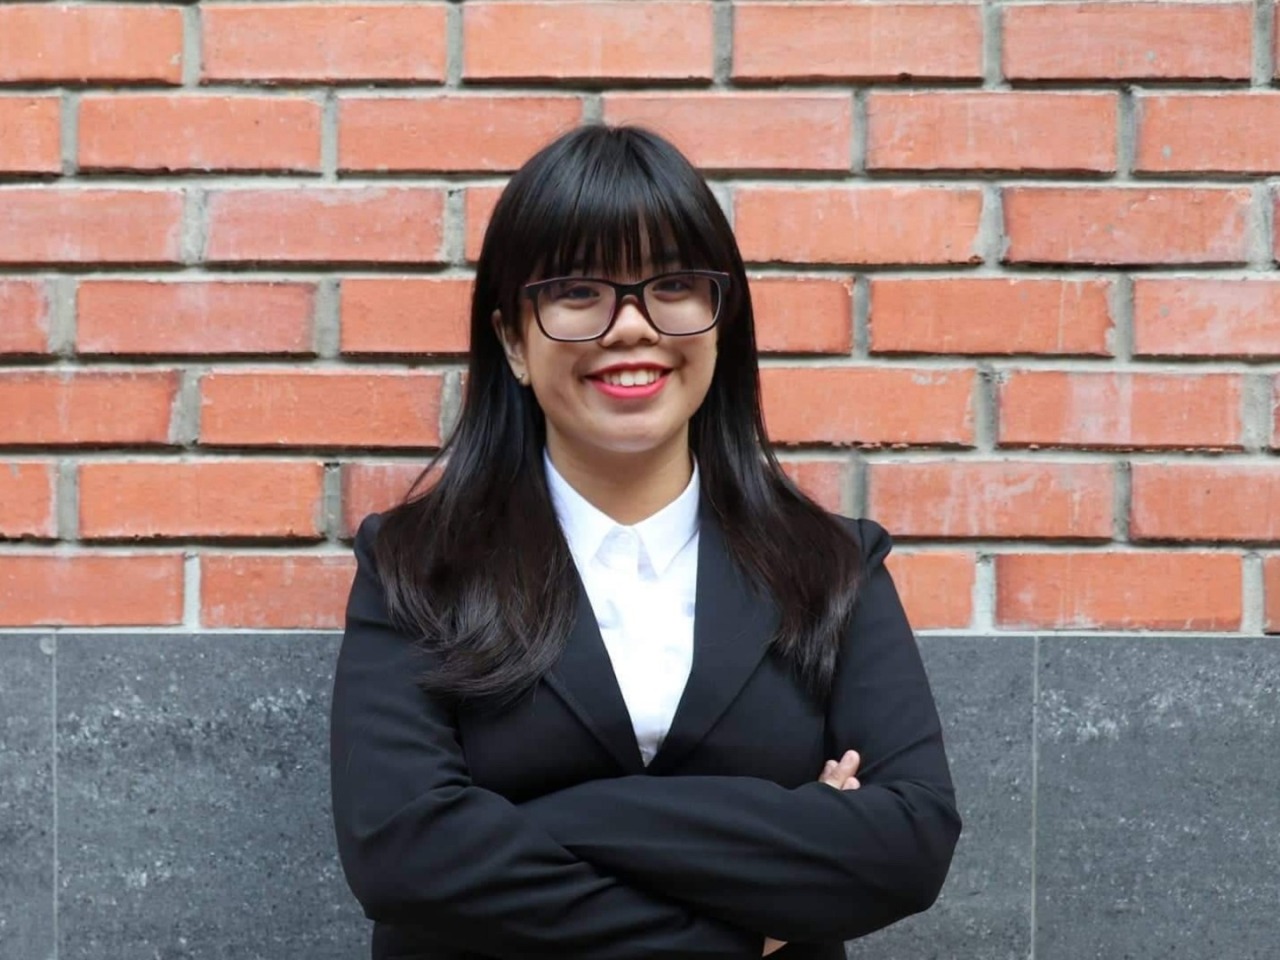 “Studying at Curtin Malaysia was my first time being away from my family and home, so naturally I was apprehensive about my new surroundings at first. Thankfully, I got to know some really great friends with whom I had a memorable university...